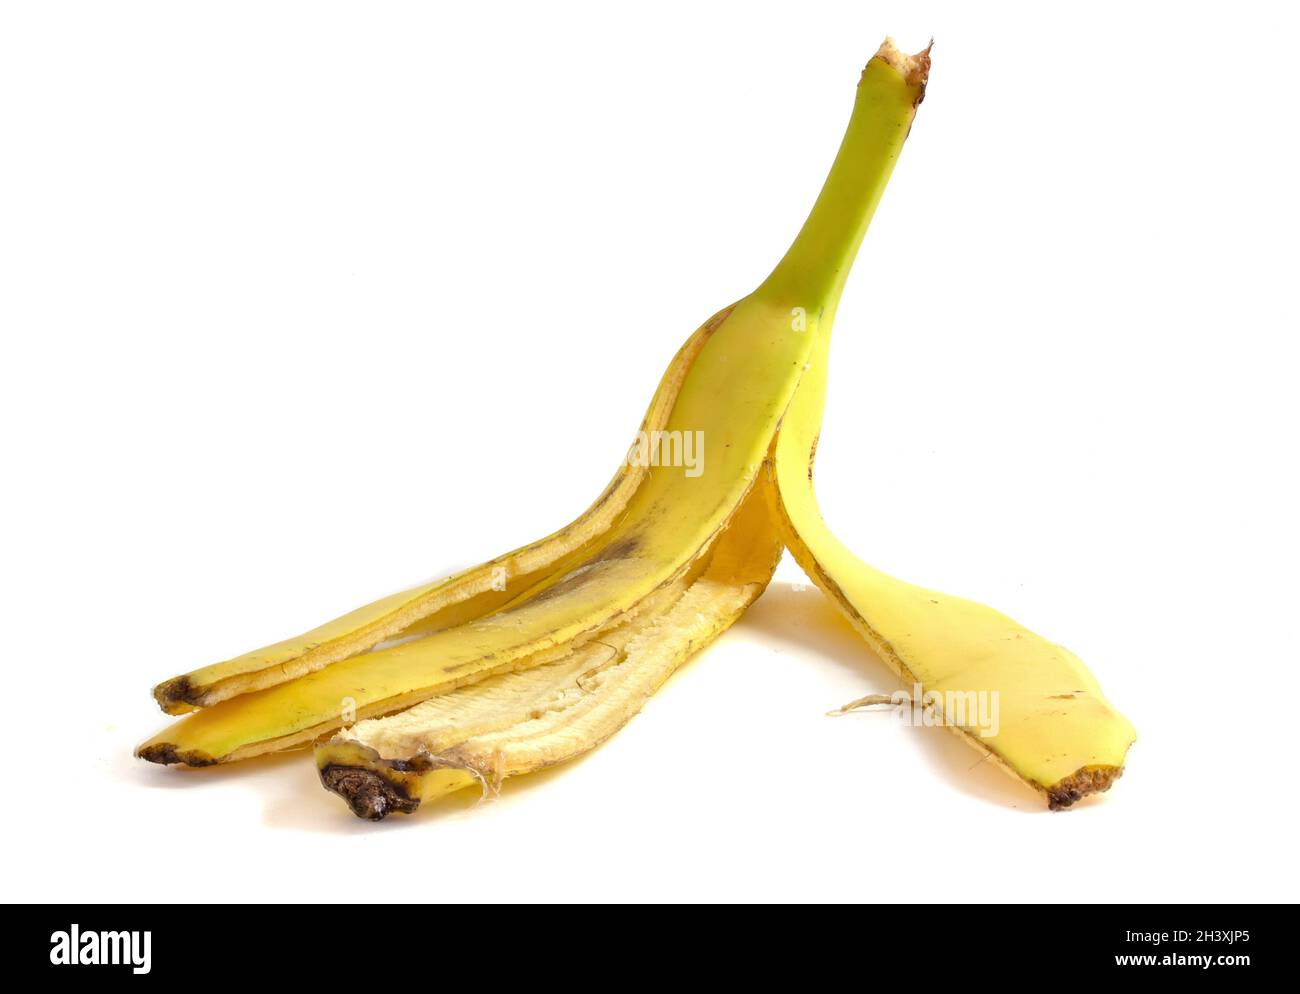 Banana peel isolated on white background close up. Organic material for compost. Stock Photo